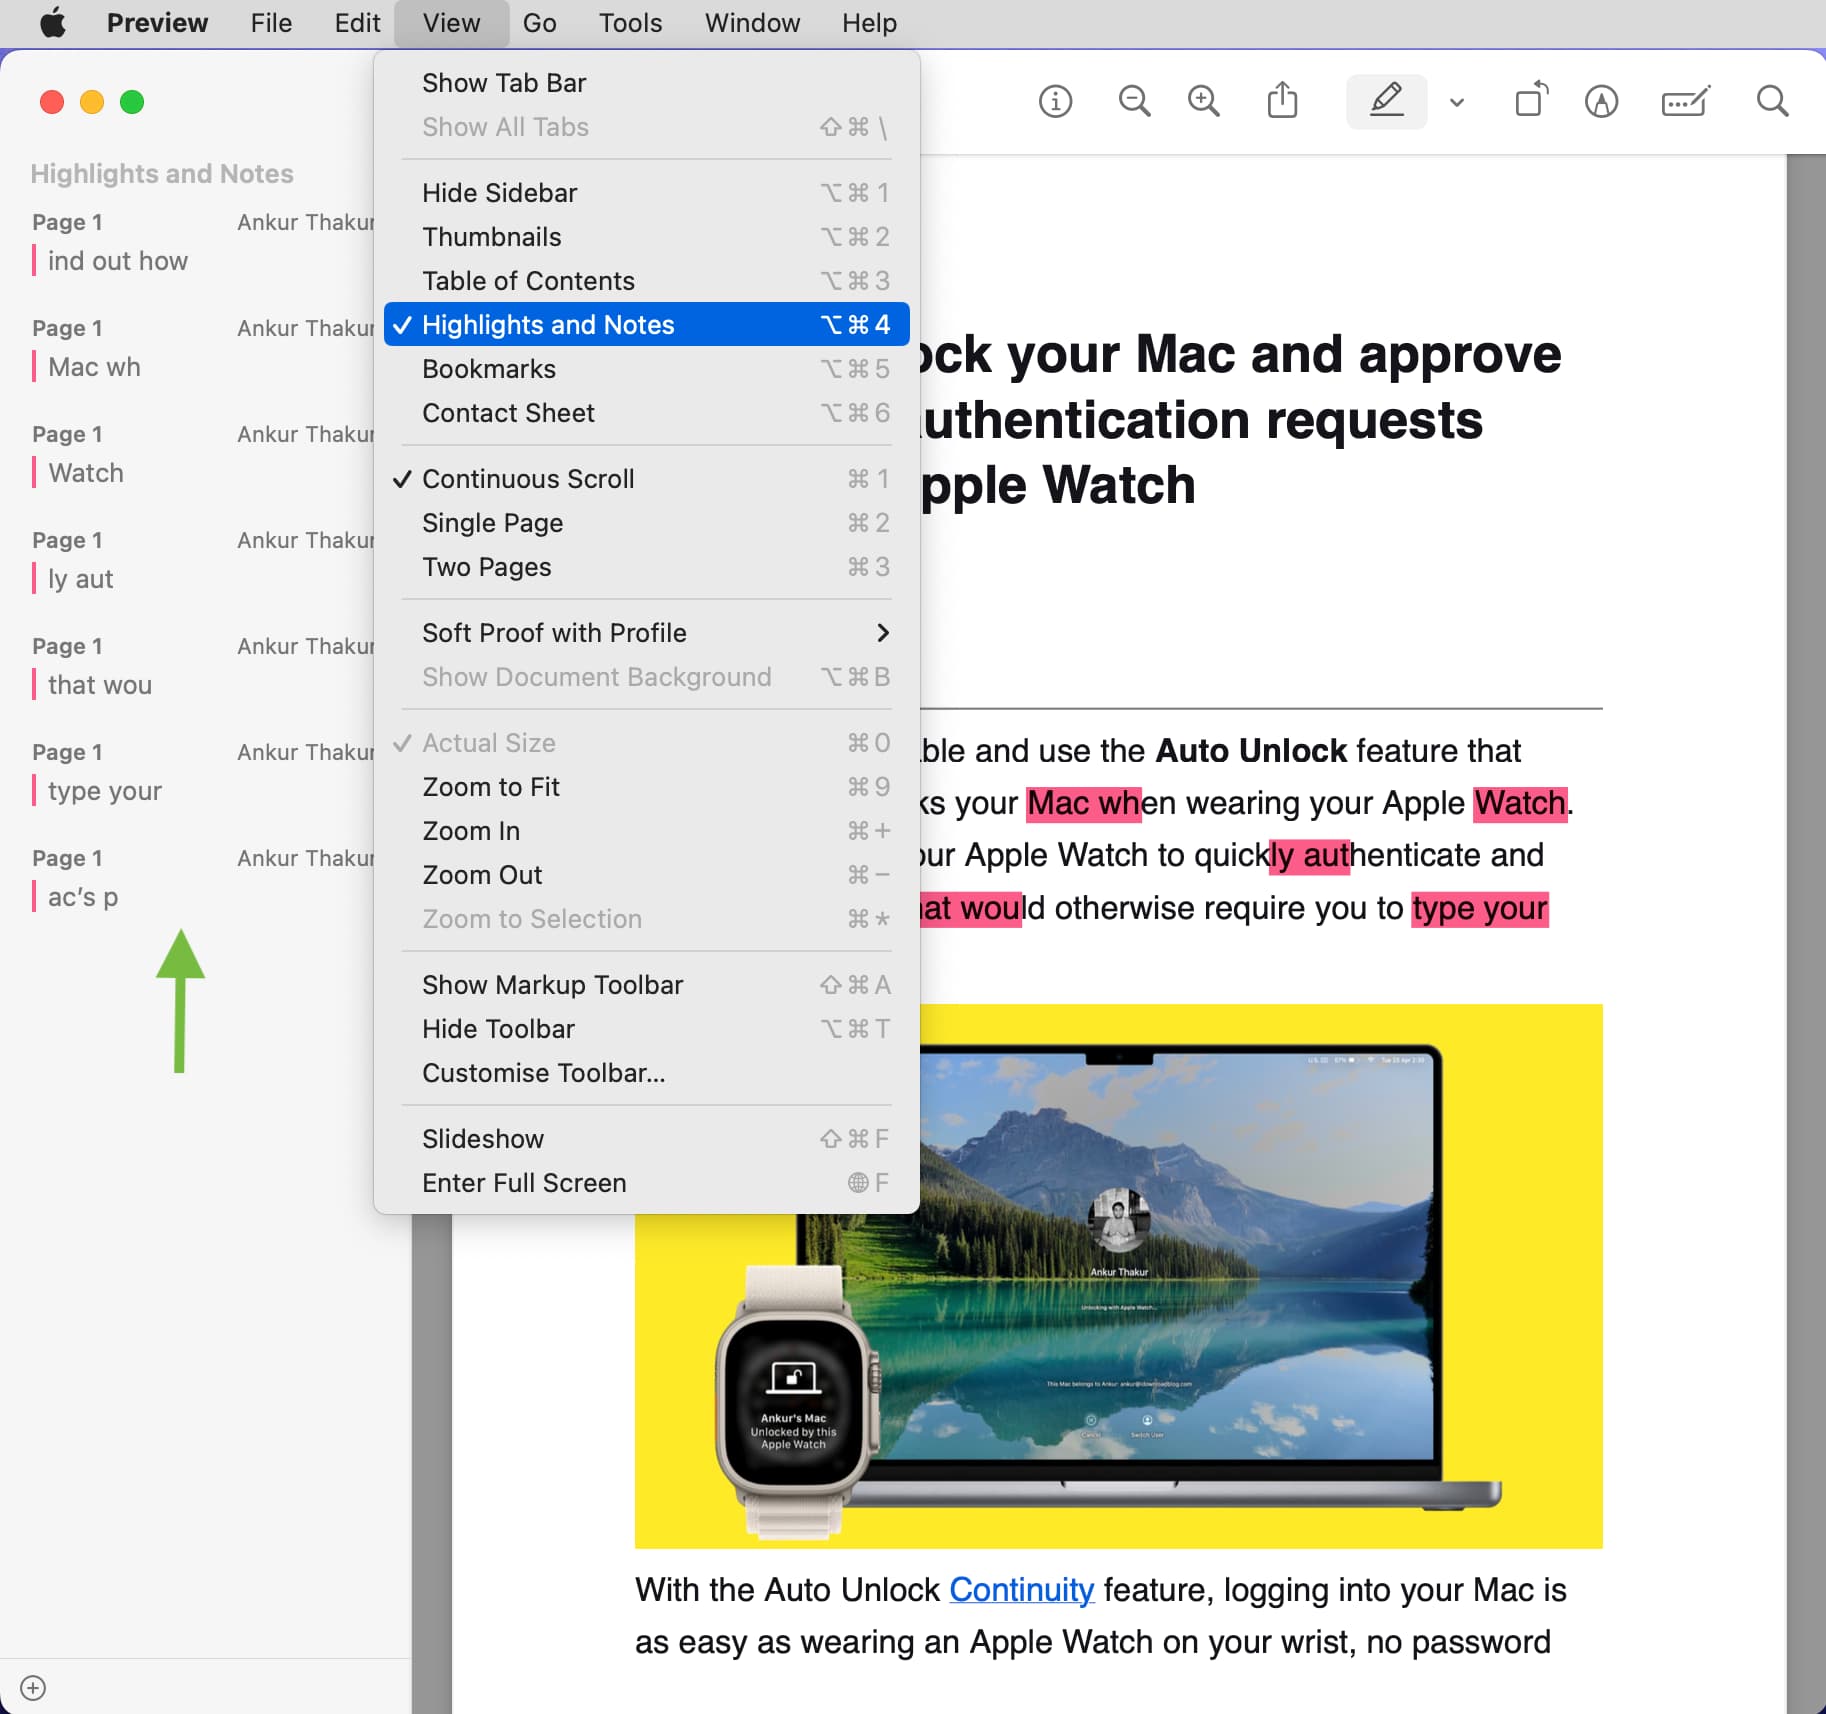 View PDF Highlights and Notes in Preview on Mac